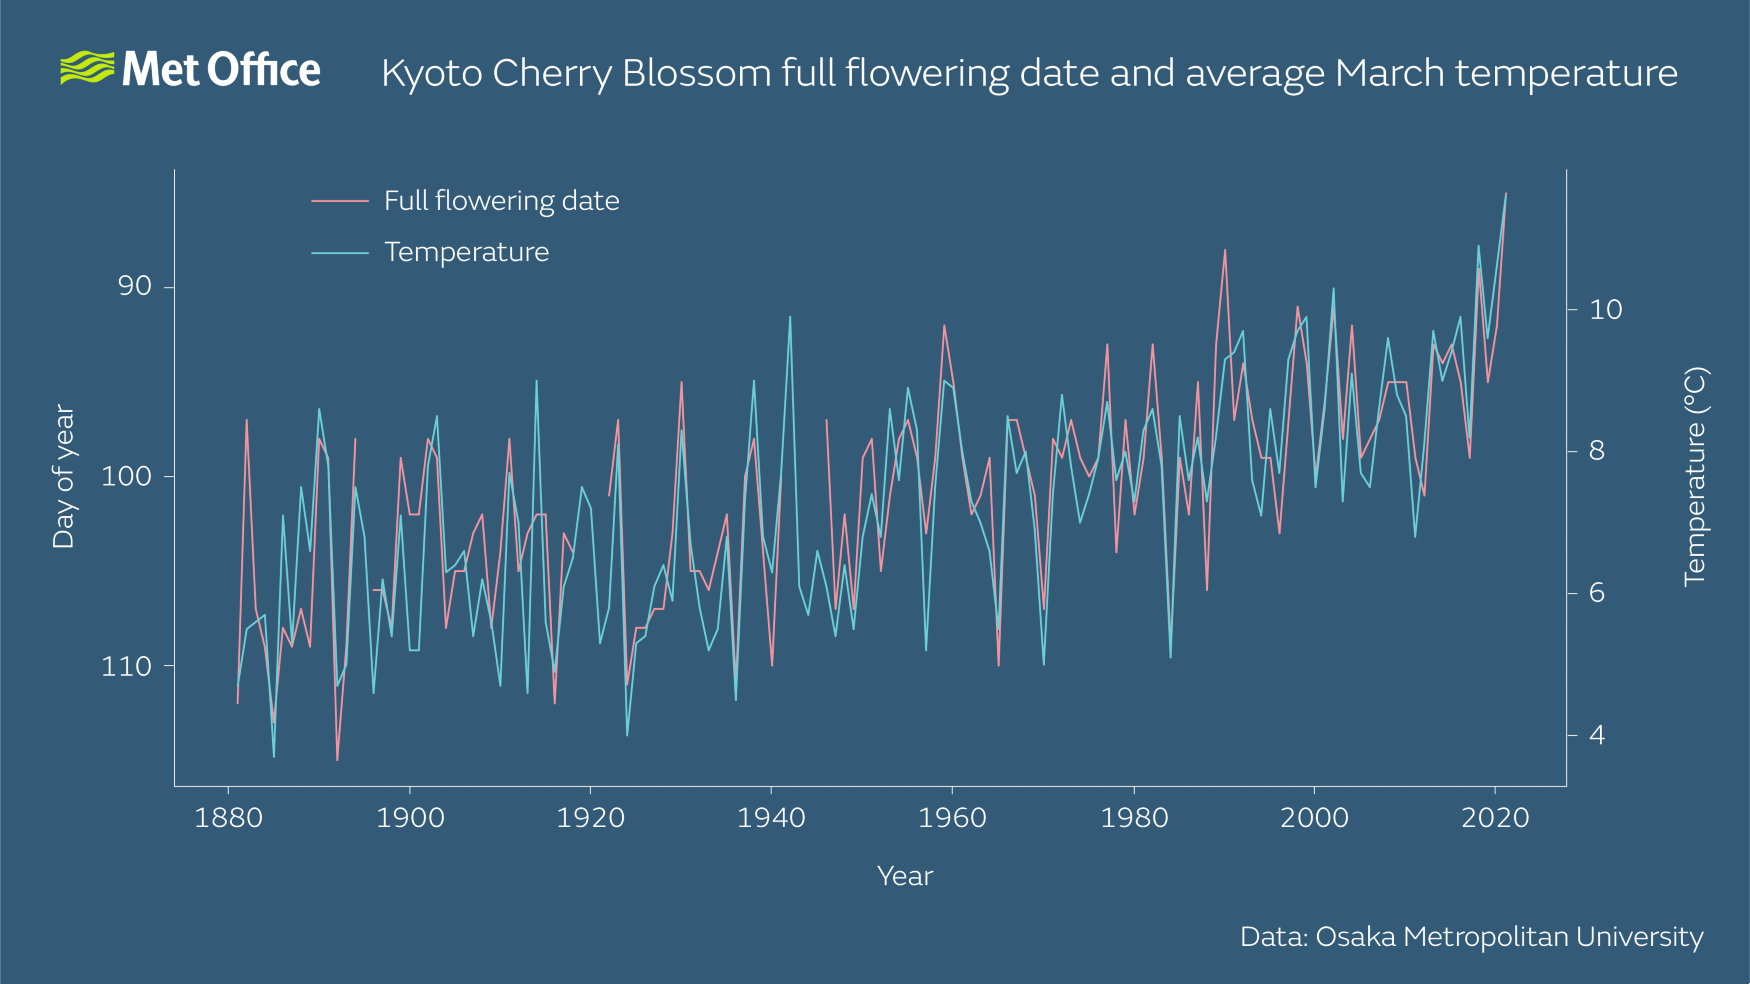 Graph showing Kyoto cherry blossom flowering dates and average March Kyoto temperature